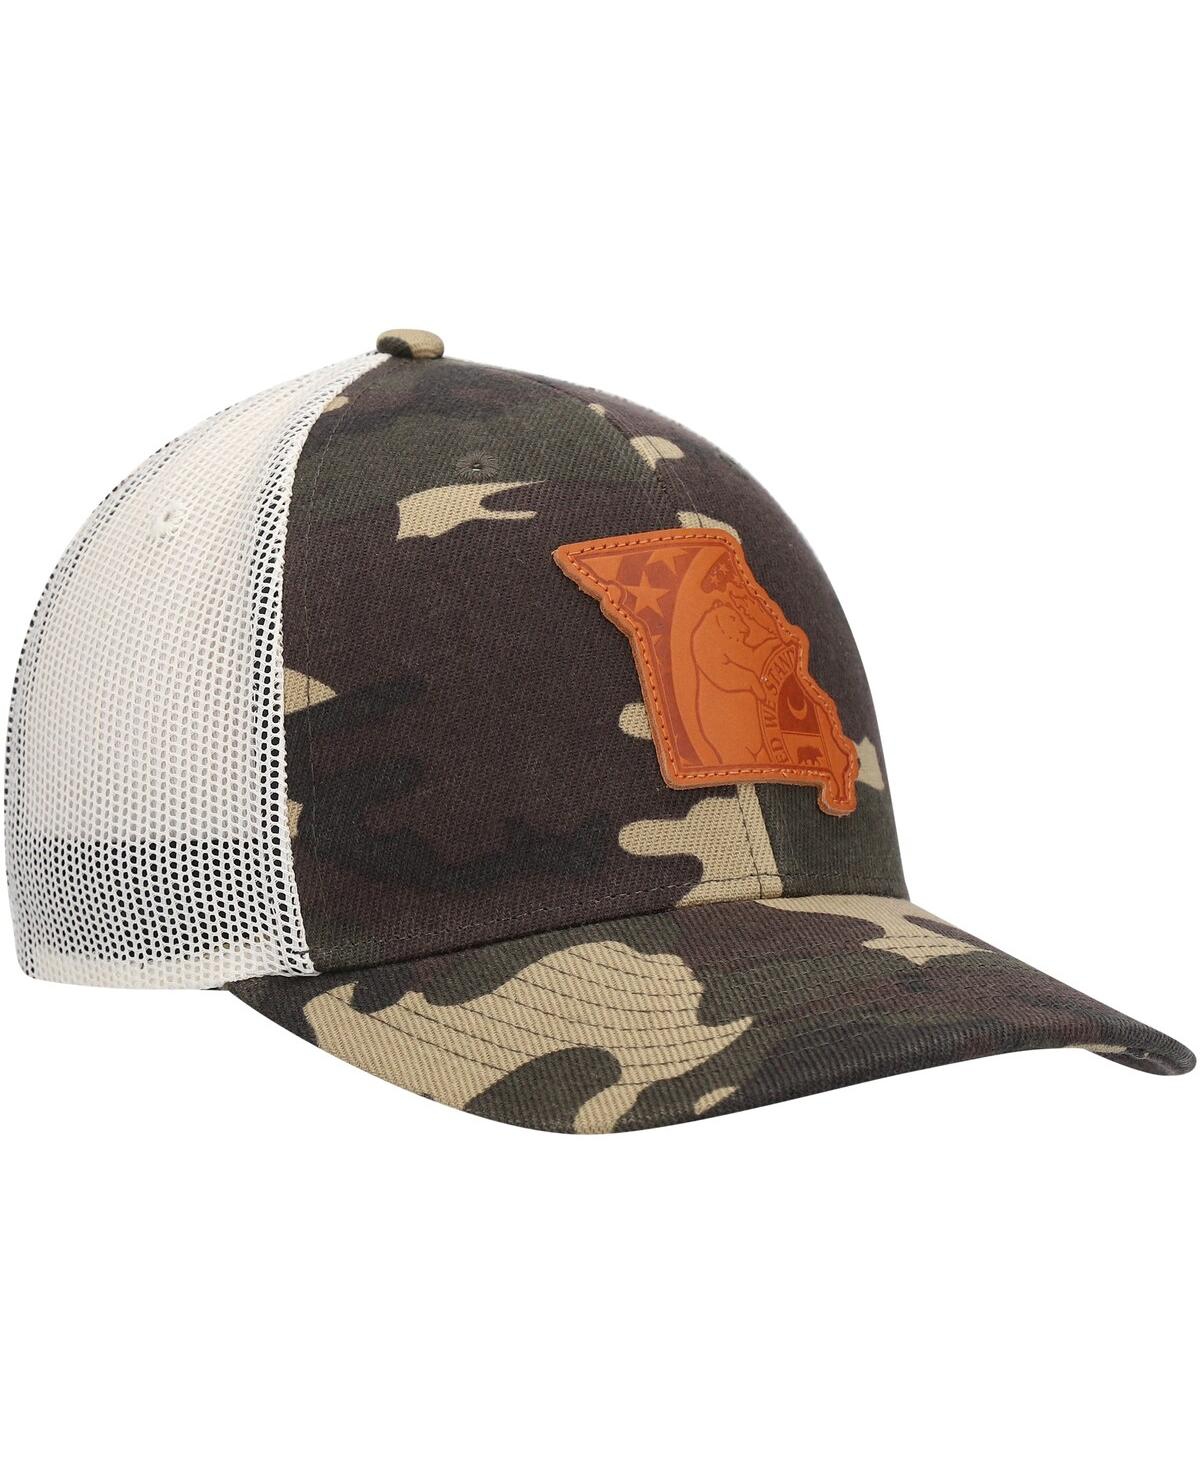 Shop Local Crowns Men's  Camo Missouri Icon Woodland State Patch Trucker Snapback Hat